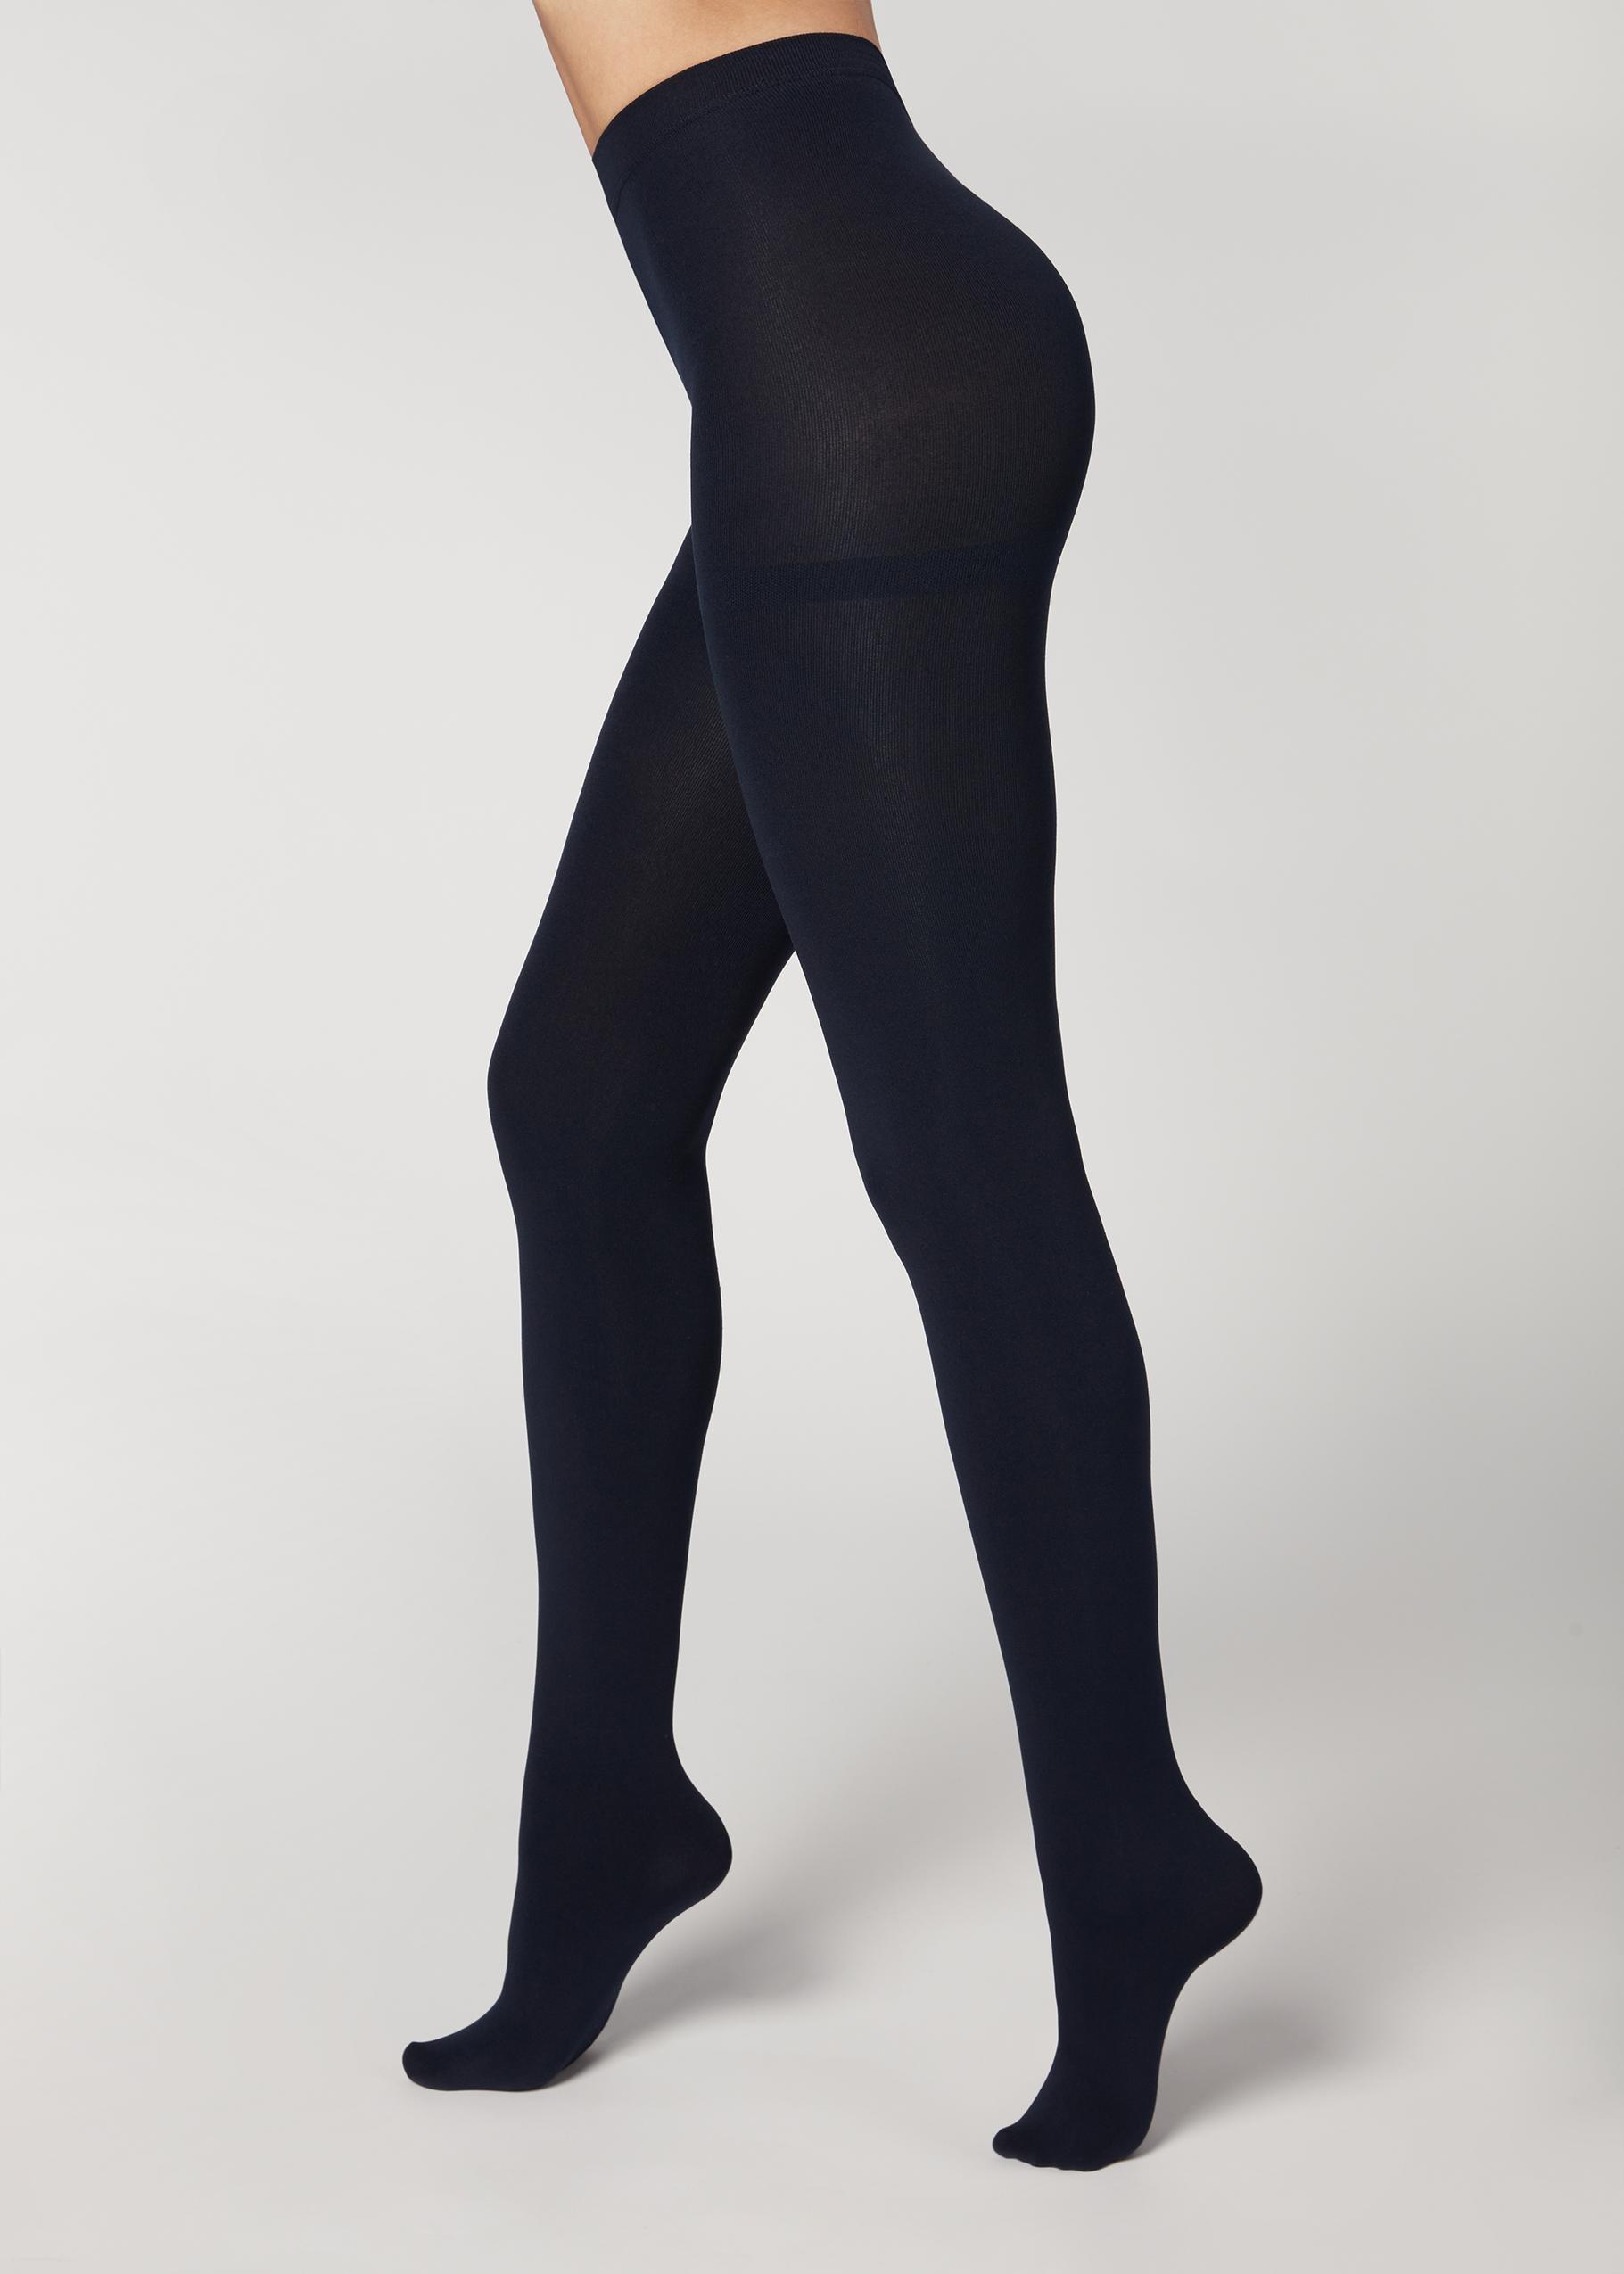 Girl's thermal tights - Calzedonia